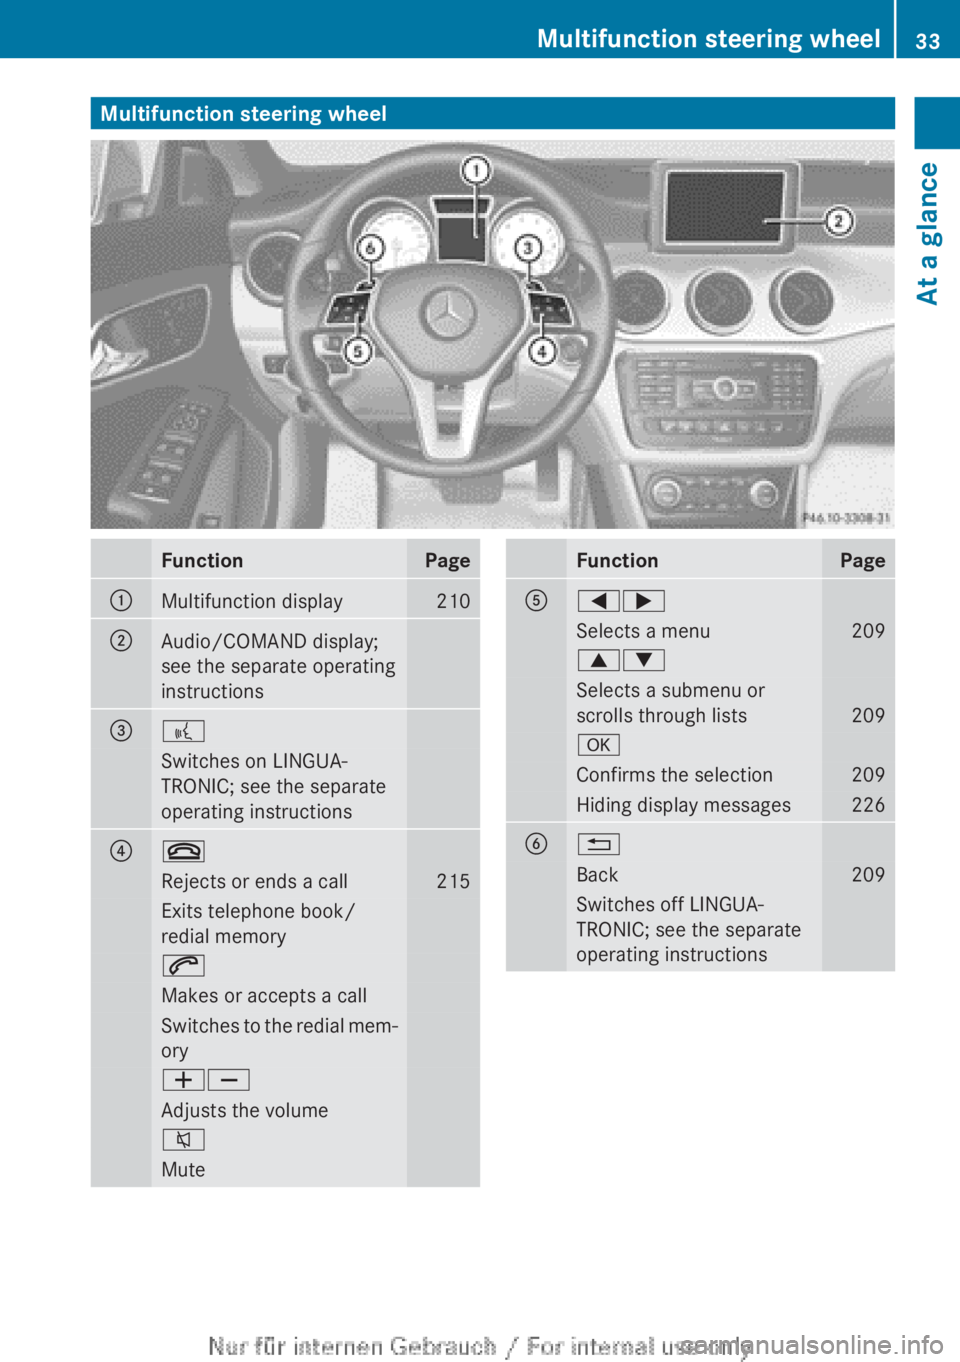 MERCEDES-BENZ CLA 2013 Owners Guide Multifunction steering wheelFunctionPage:Multifunction display210;Audio/COMAND display;
see the separate operating
instructions=?Switches on LINGUA-
TRONIC; see the separate
operating instructions?~Re